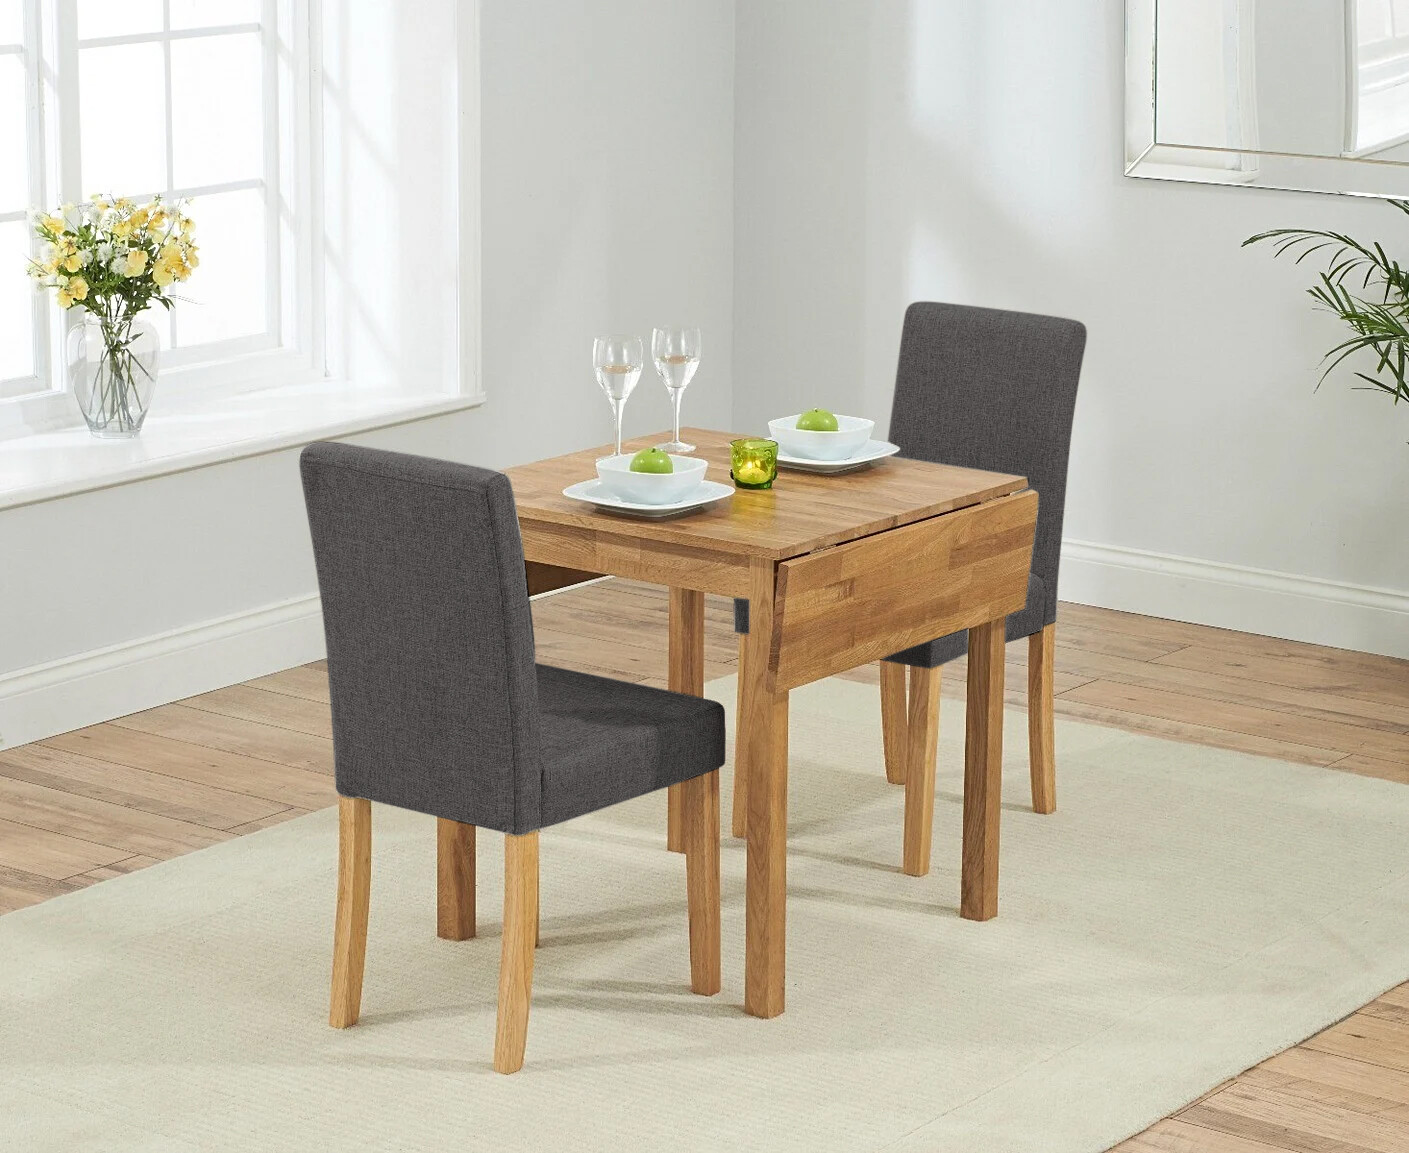 Photo 2 of Extending york 70cm solid oak drop leaf dining table with 2 grey lila chairs